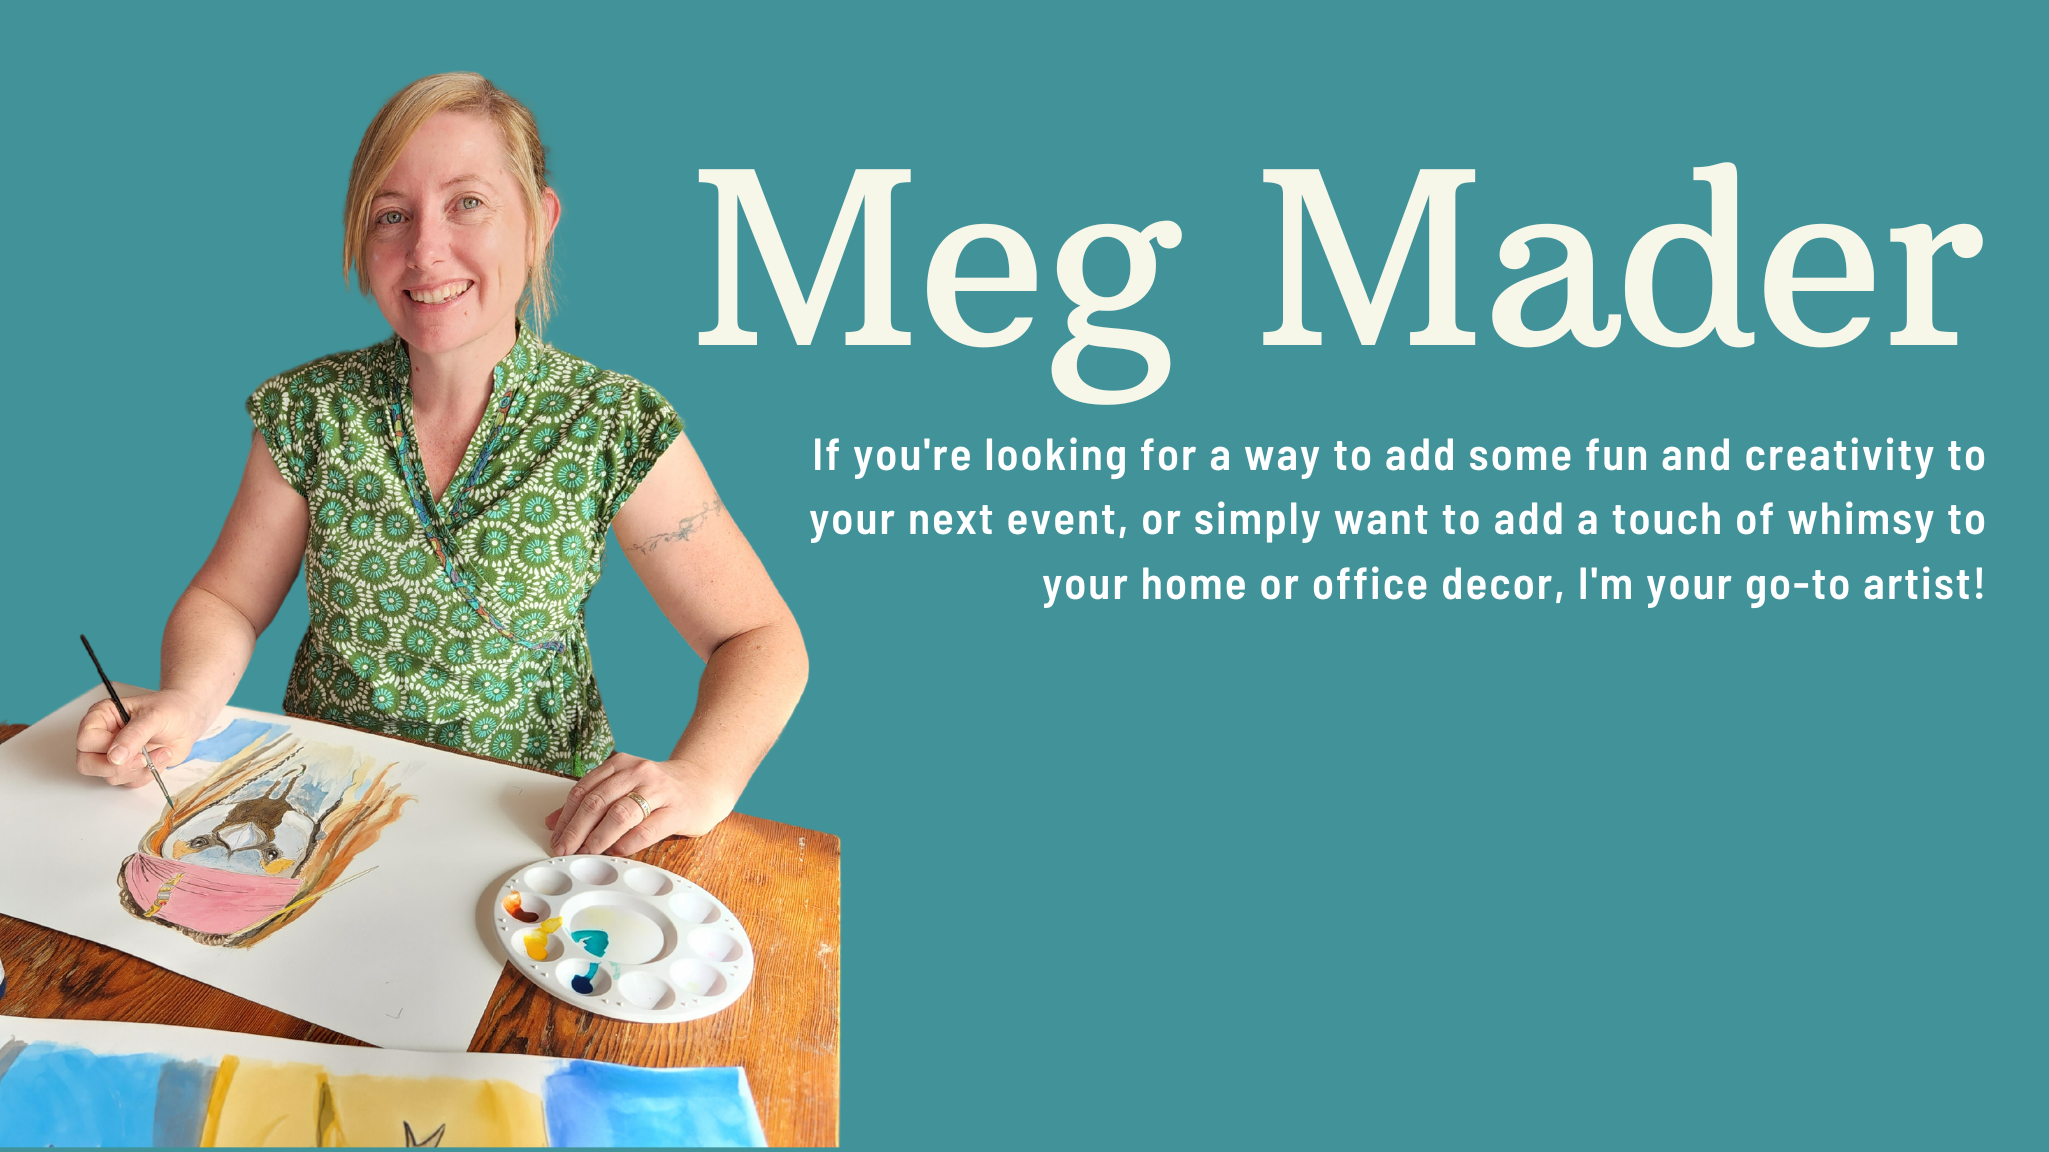 A picture of Meg Mader painting with a quote for the Contact Meg Mader from The Journey Studio page.